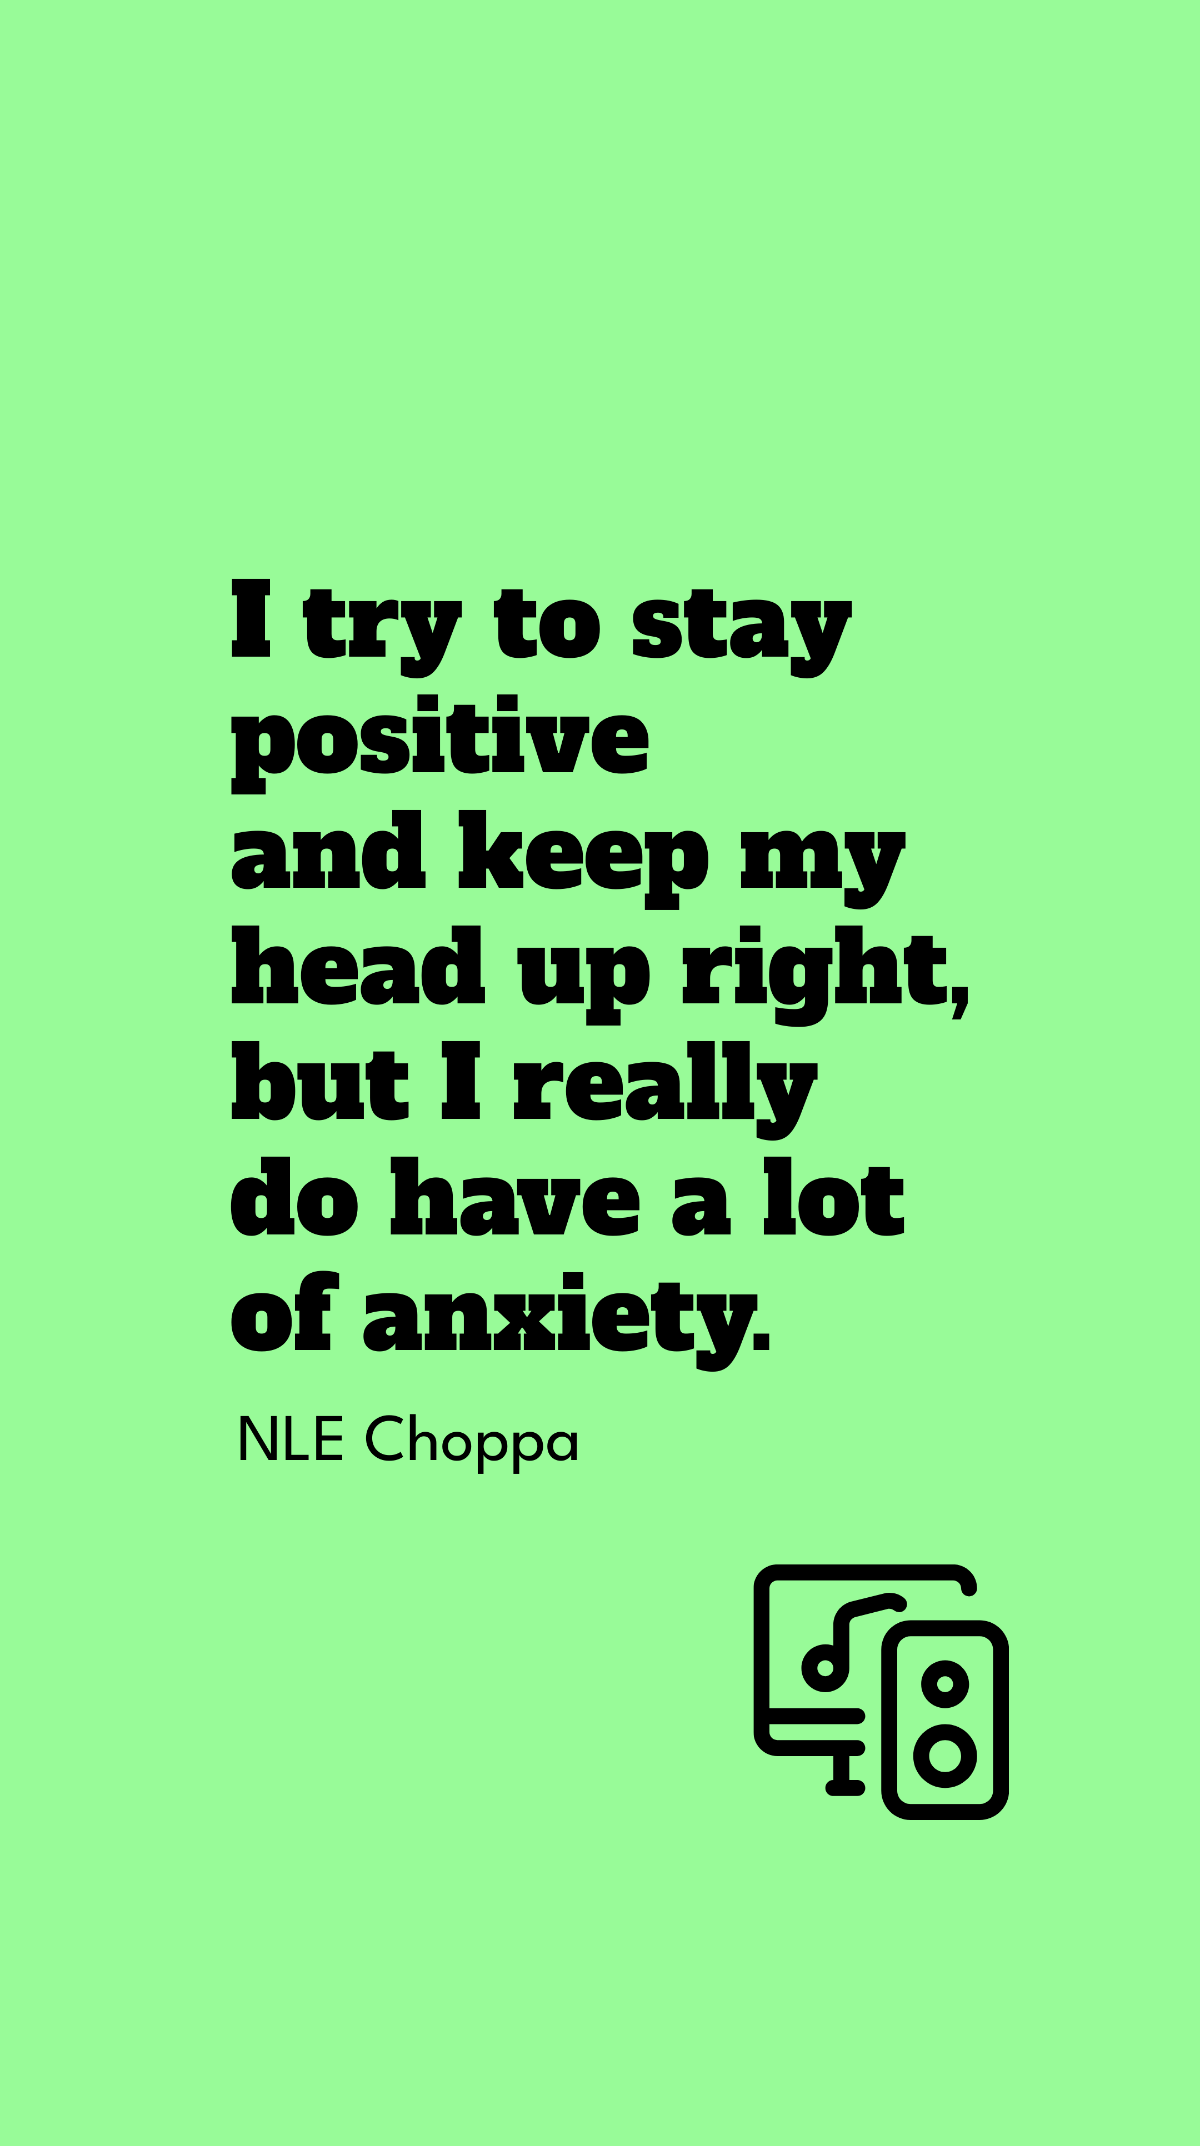 Free NLE Choppa - I try to stay positive and keep my head up right, but I really do have a lot of anxiety. Template